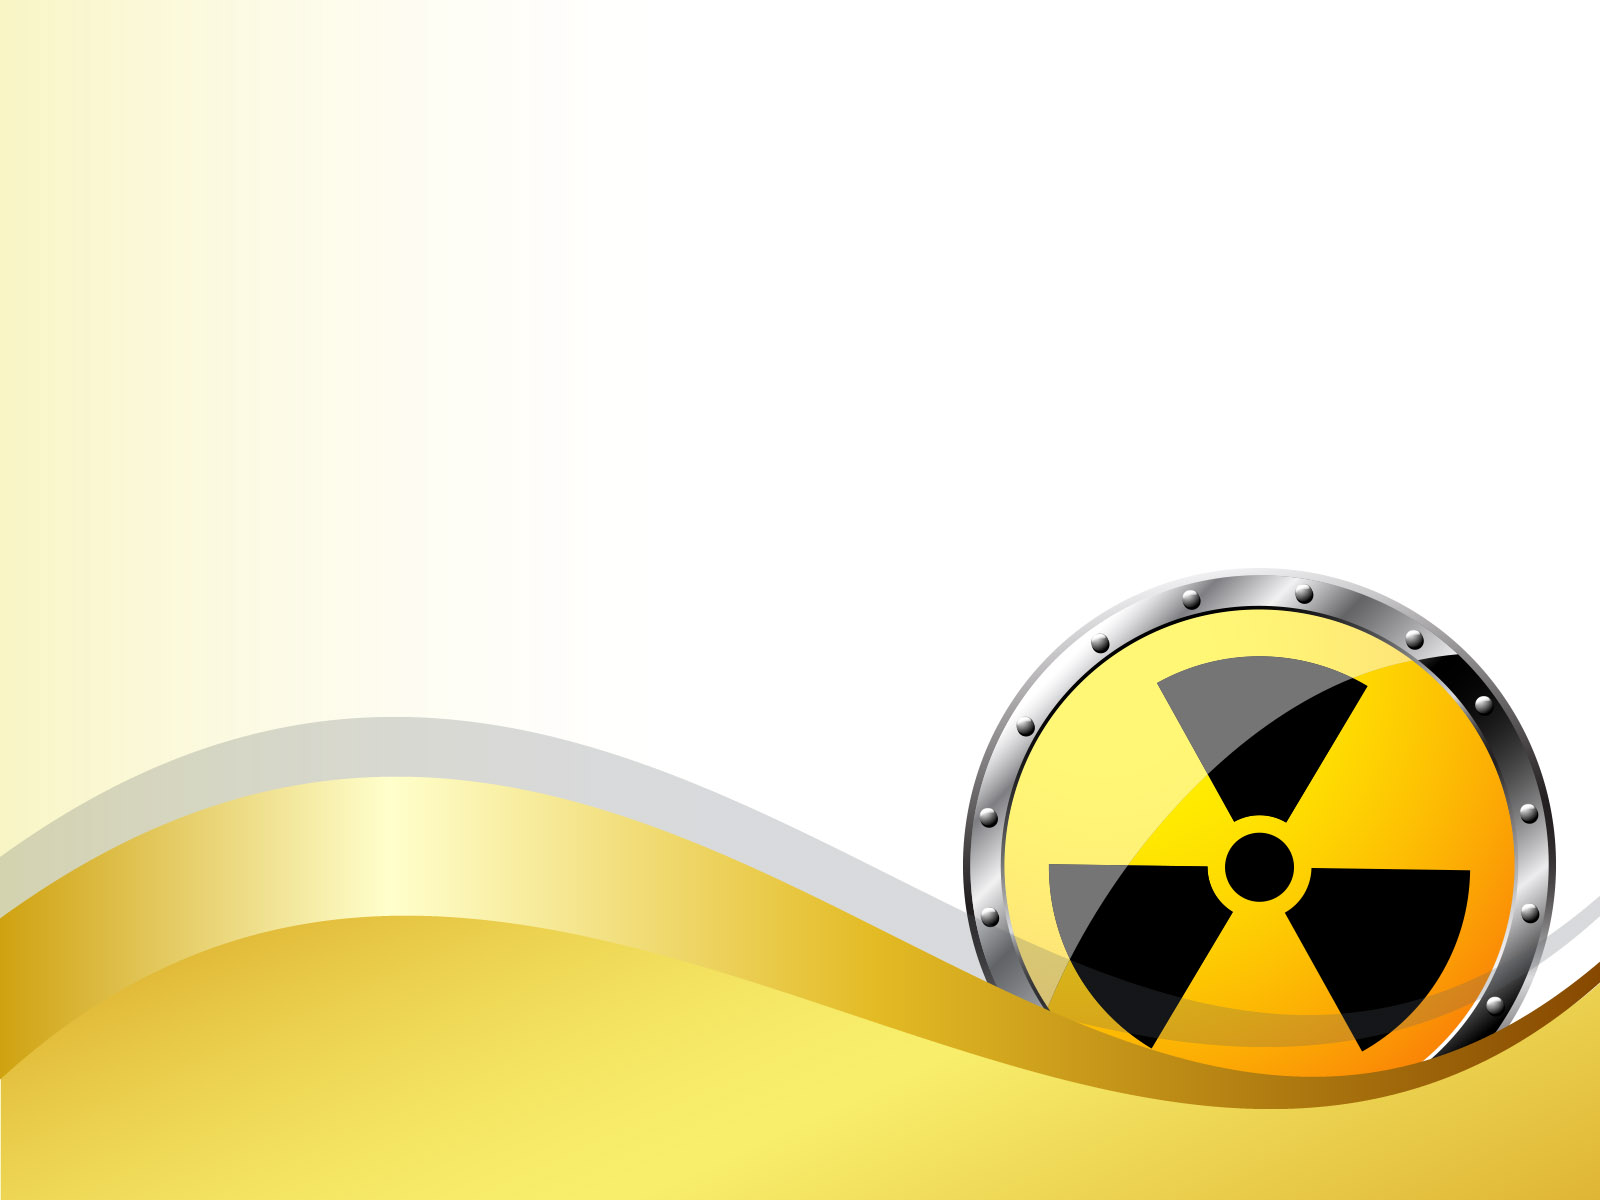 Radiation Radioactivity Powerpoint Templates Business Finance Industrial Yellow Free Ppt Backgrounds And Templates